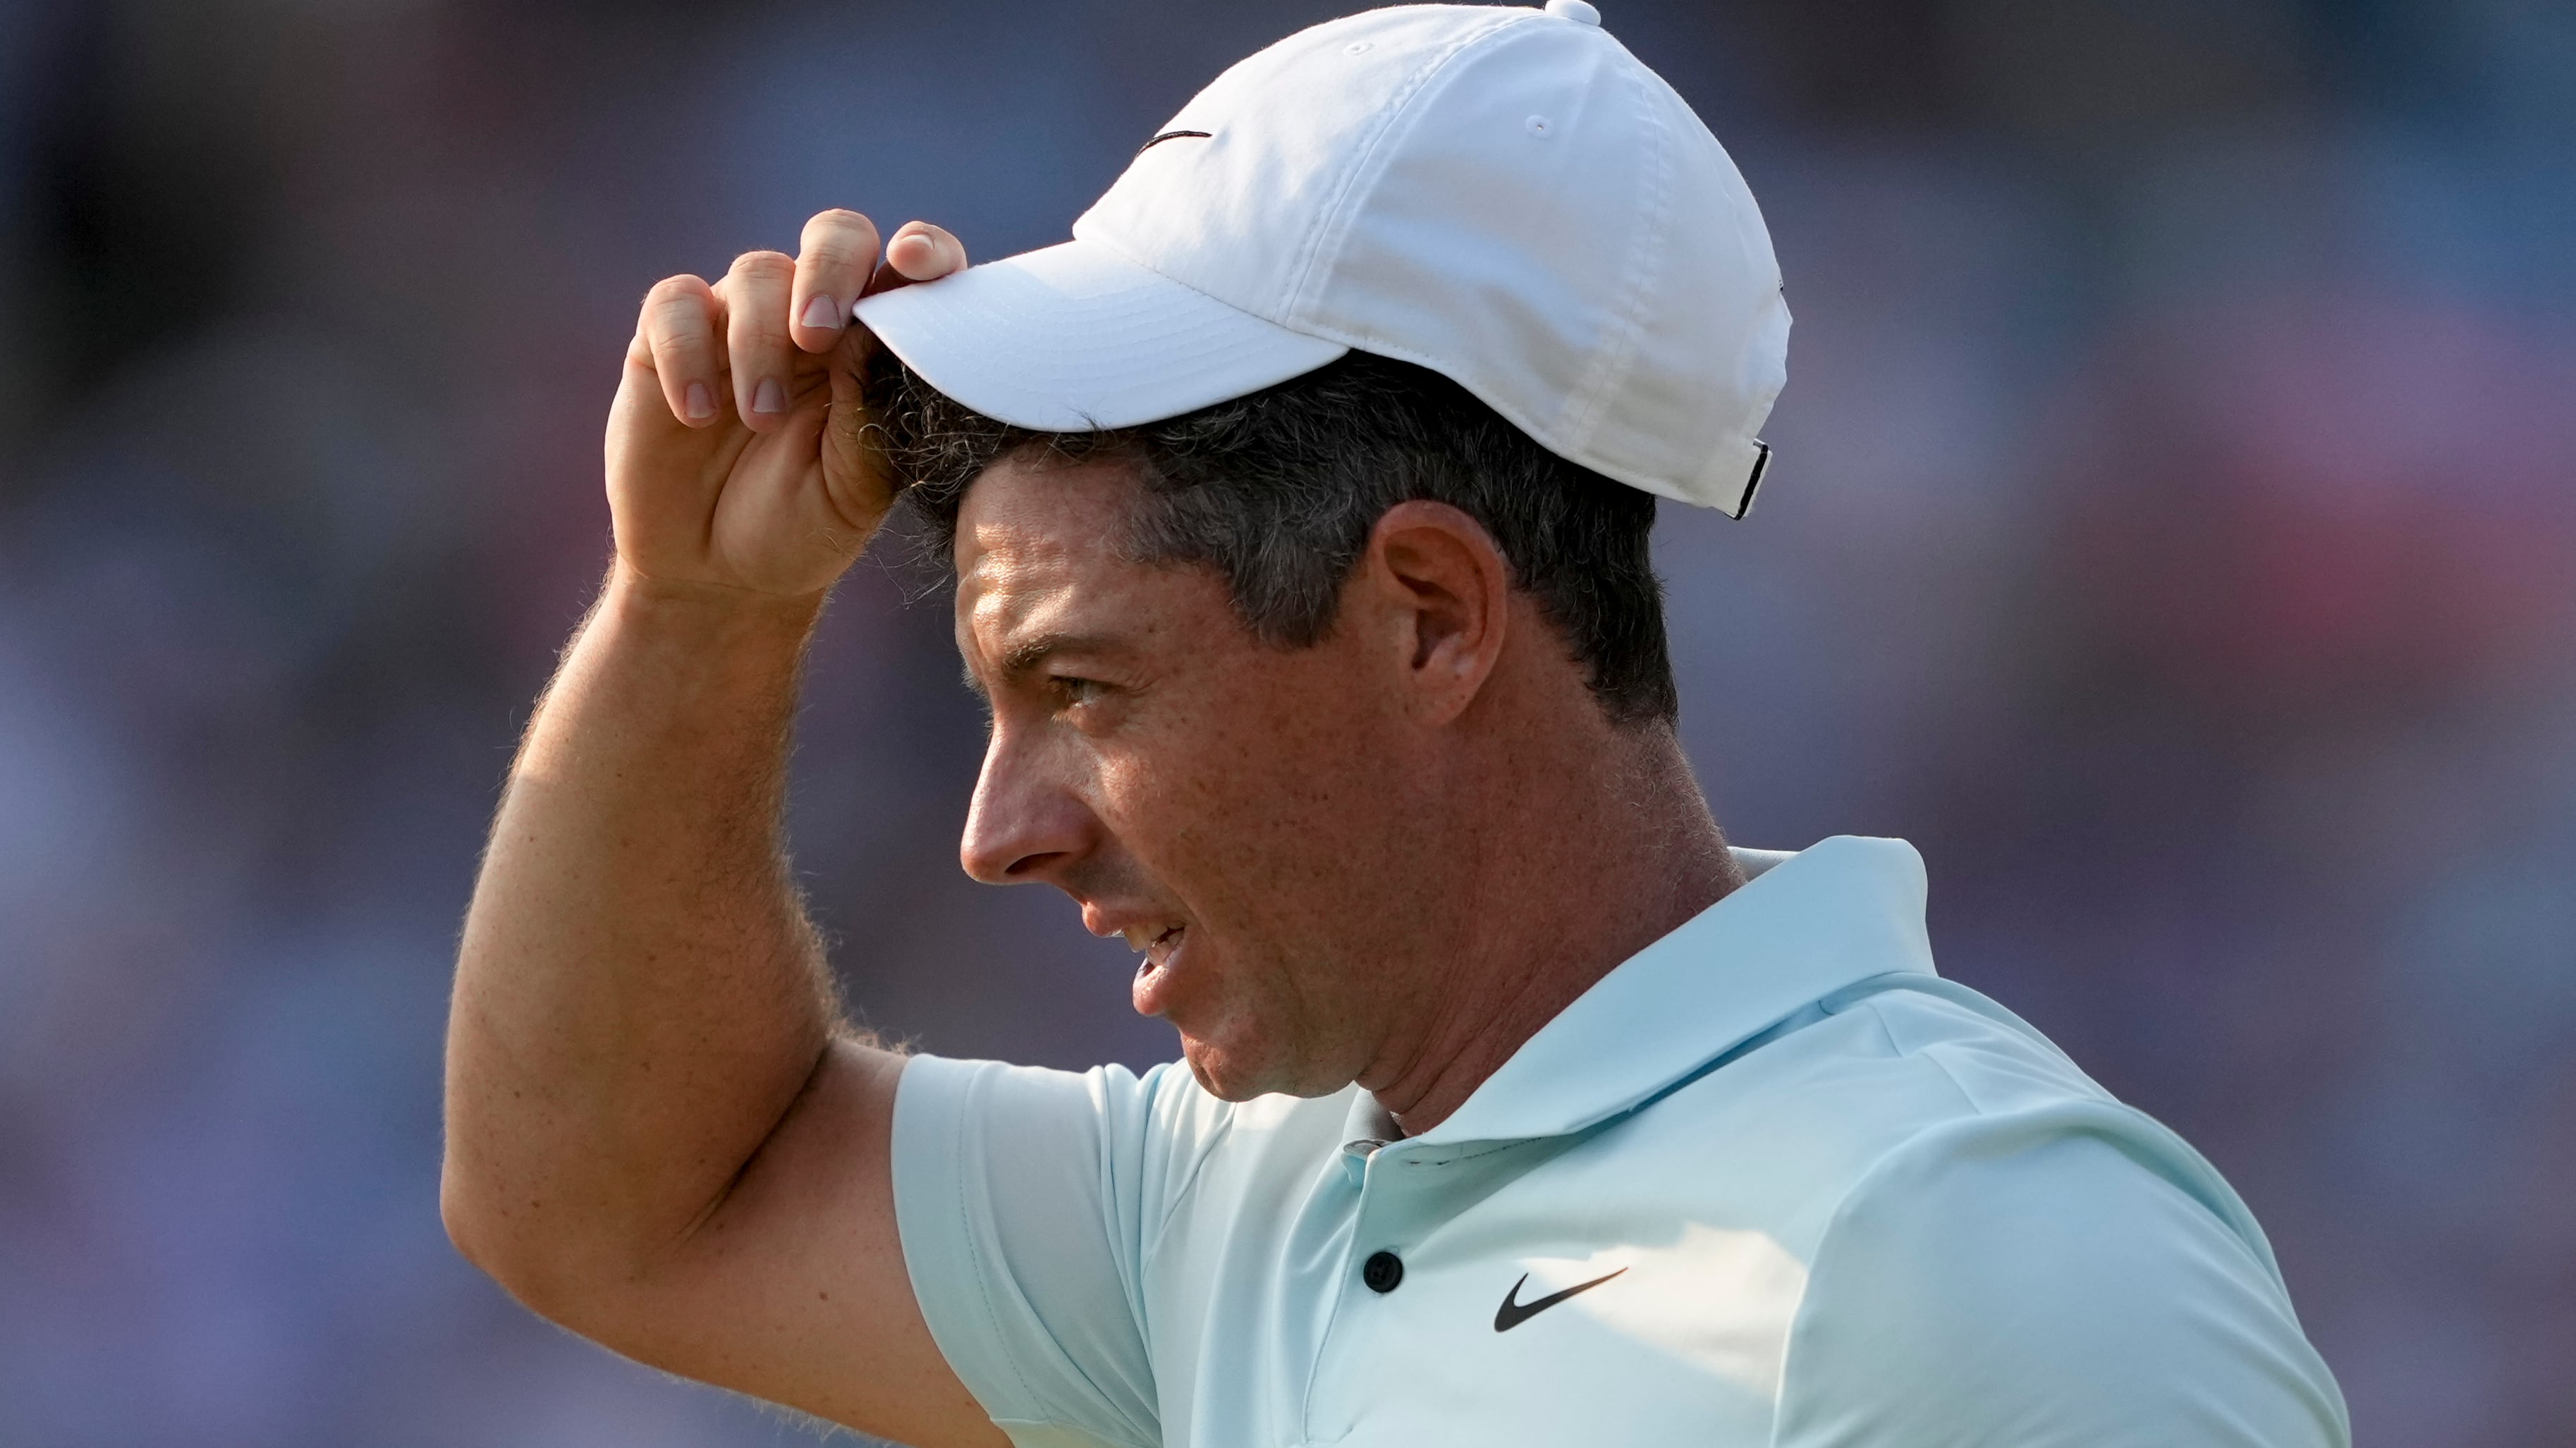 Rory McIlroy described his US Open defeat as the toughest day of his career (Matt York/AP)